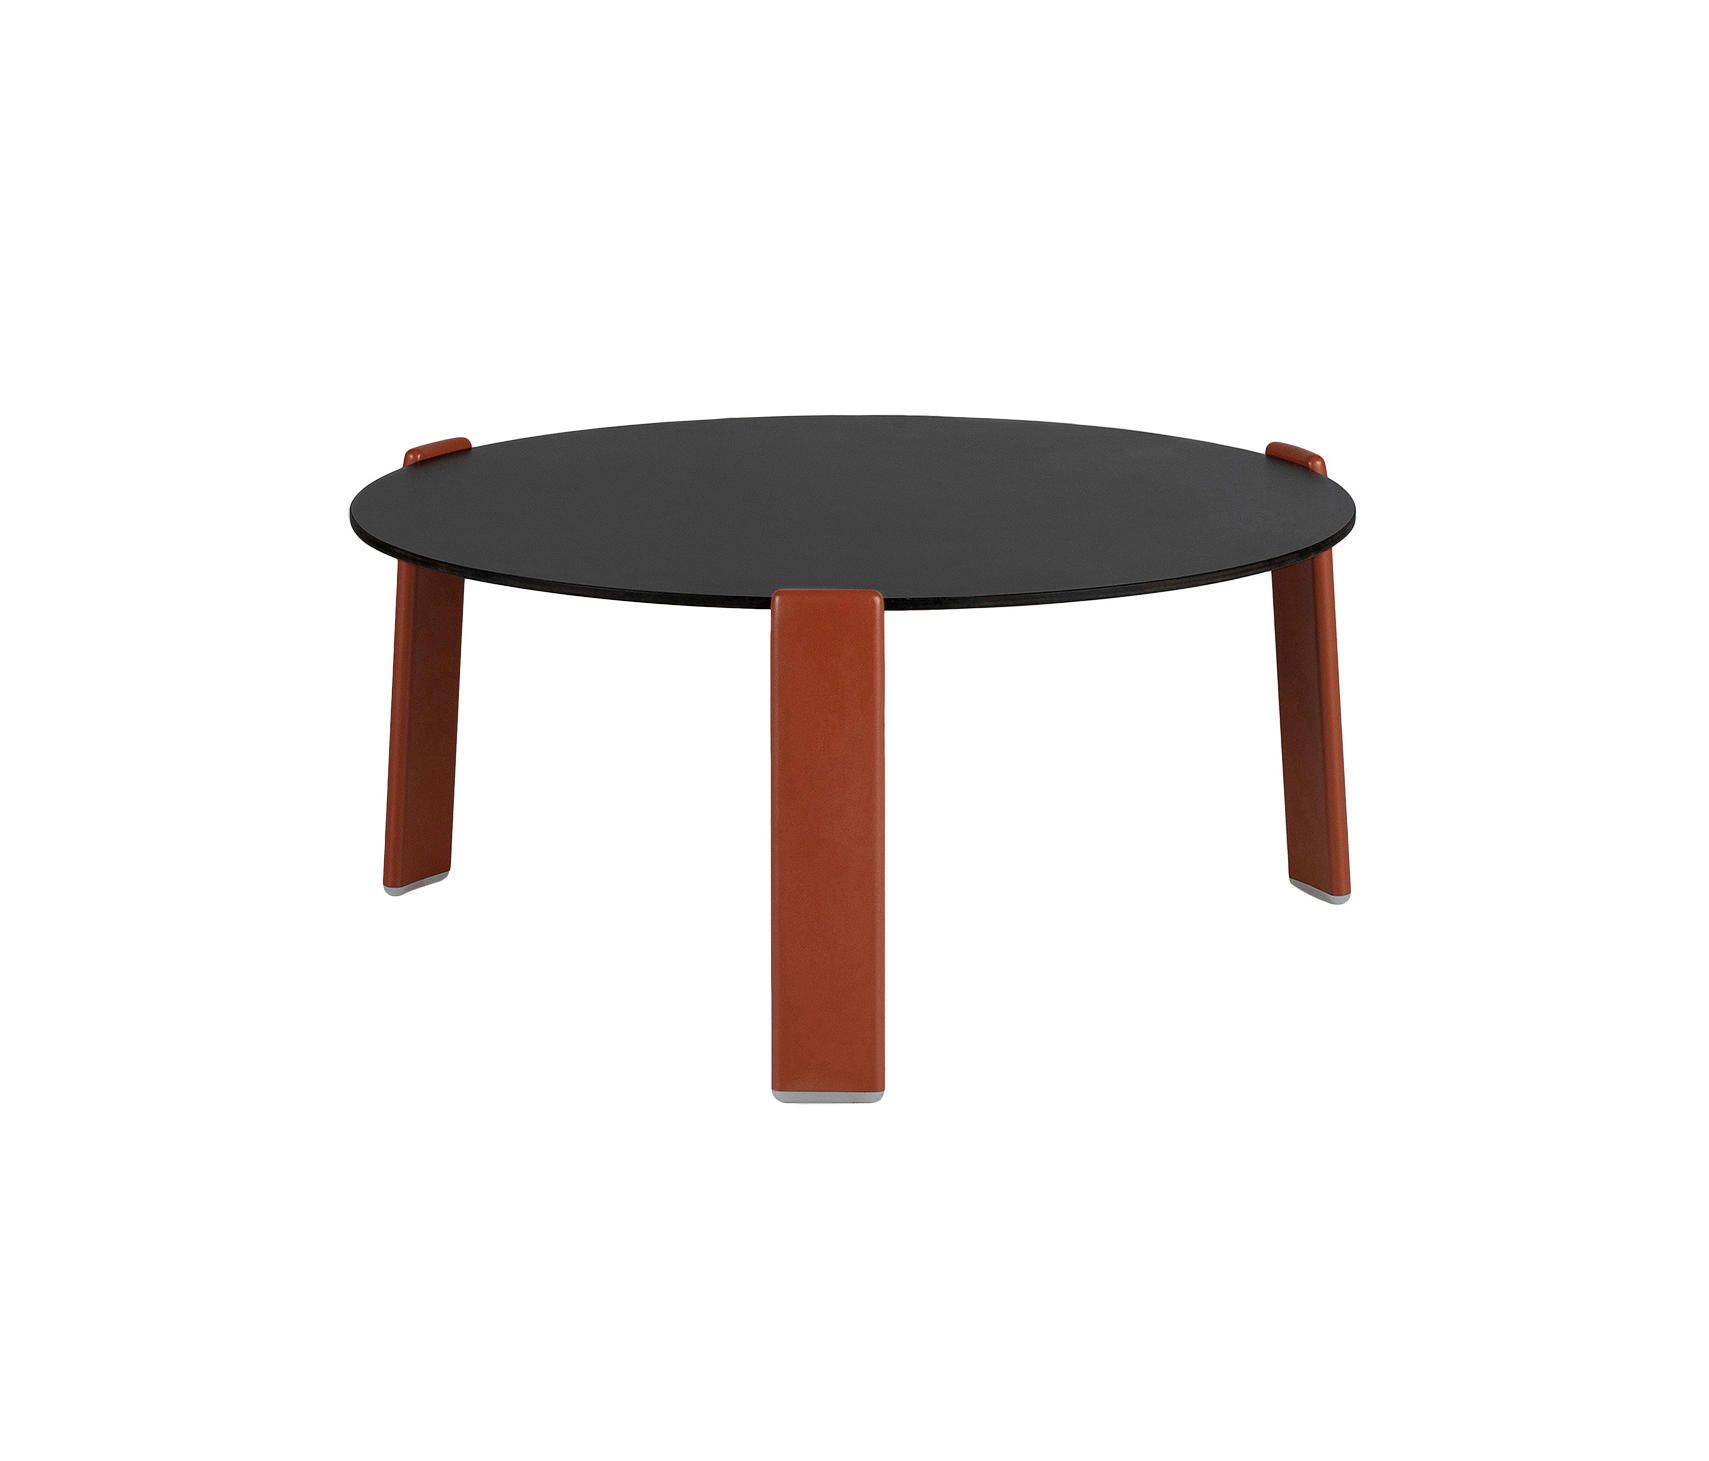 T Coffee Table – Coffee Tables From Point | Architonic Pertaining To White T Base Seminar Coffee Tables (View 5 of 20)